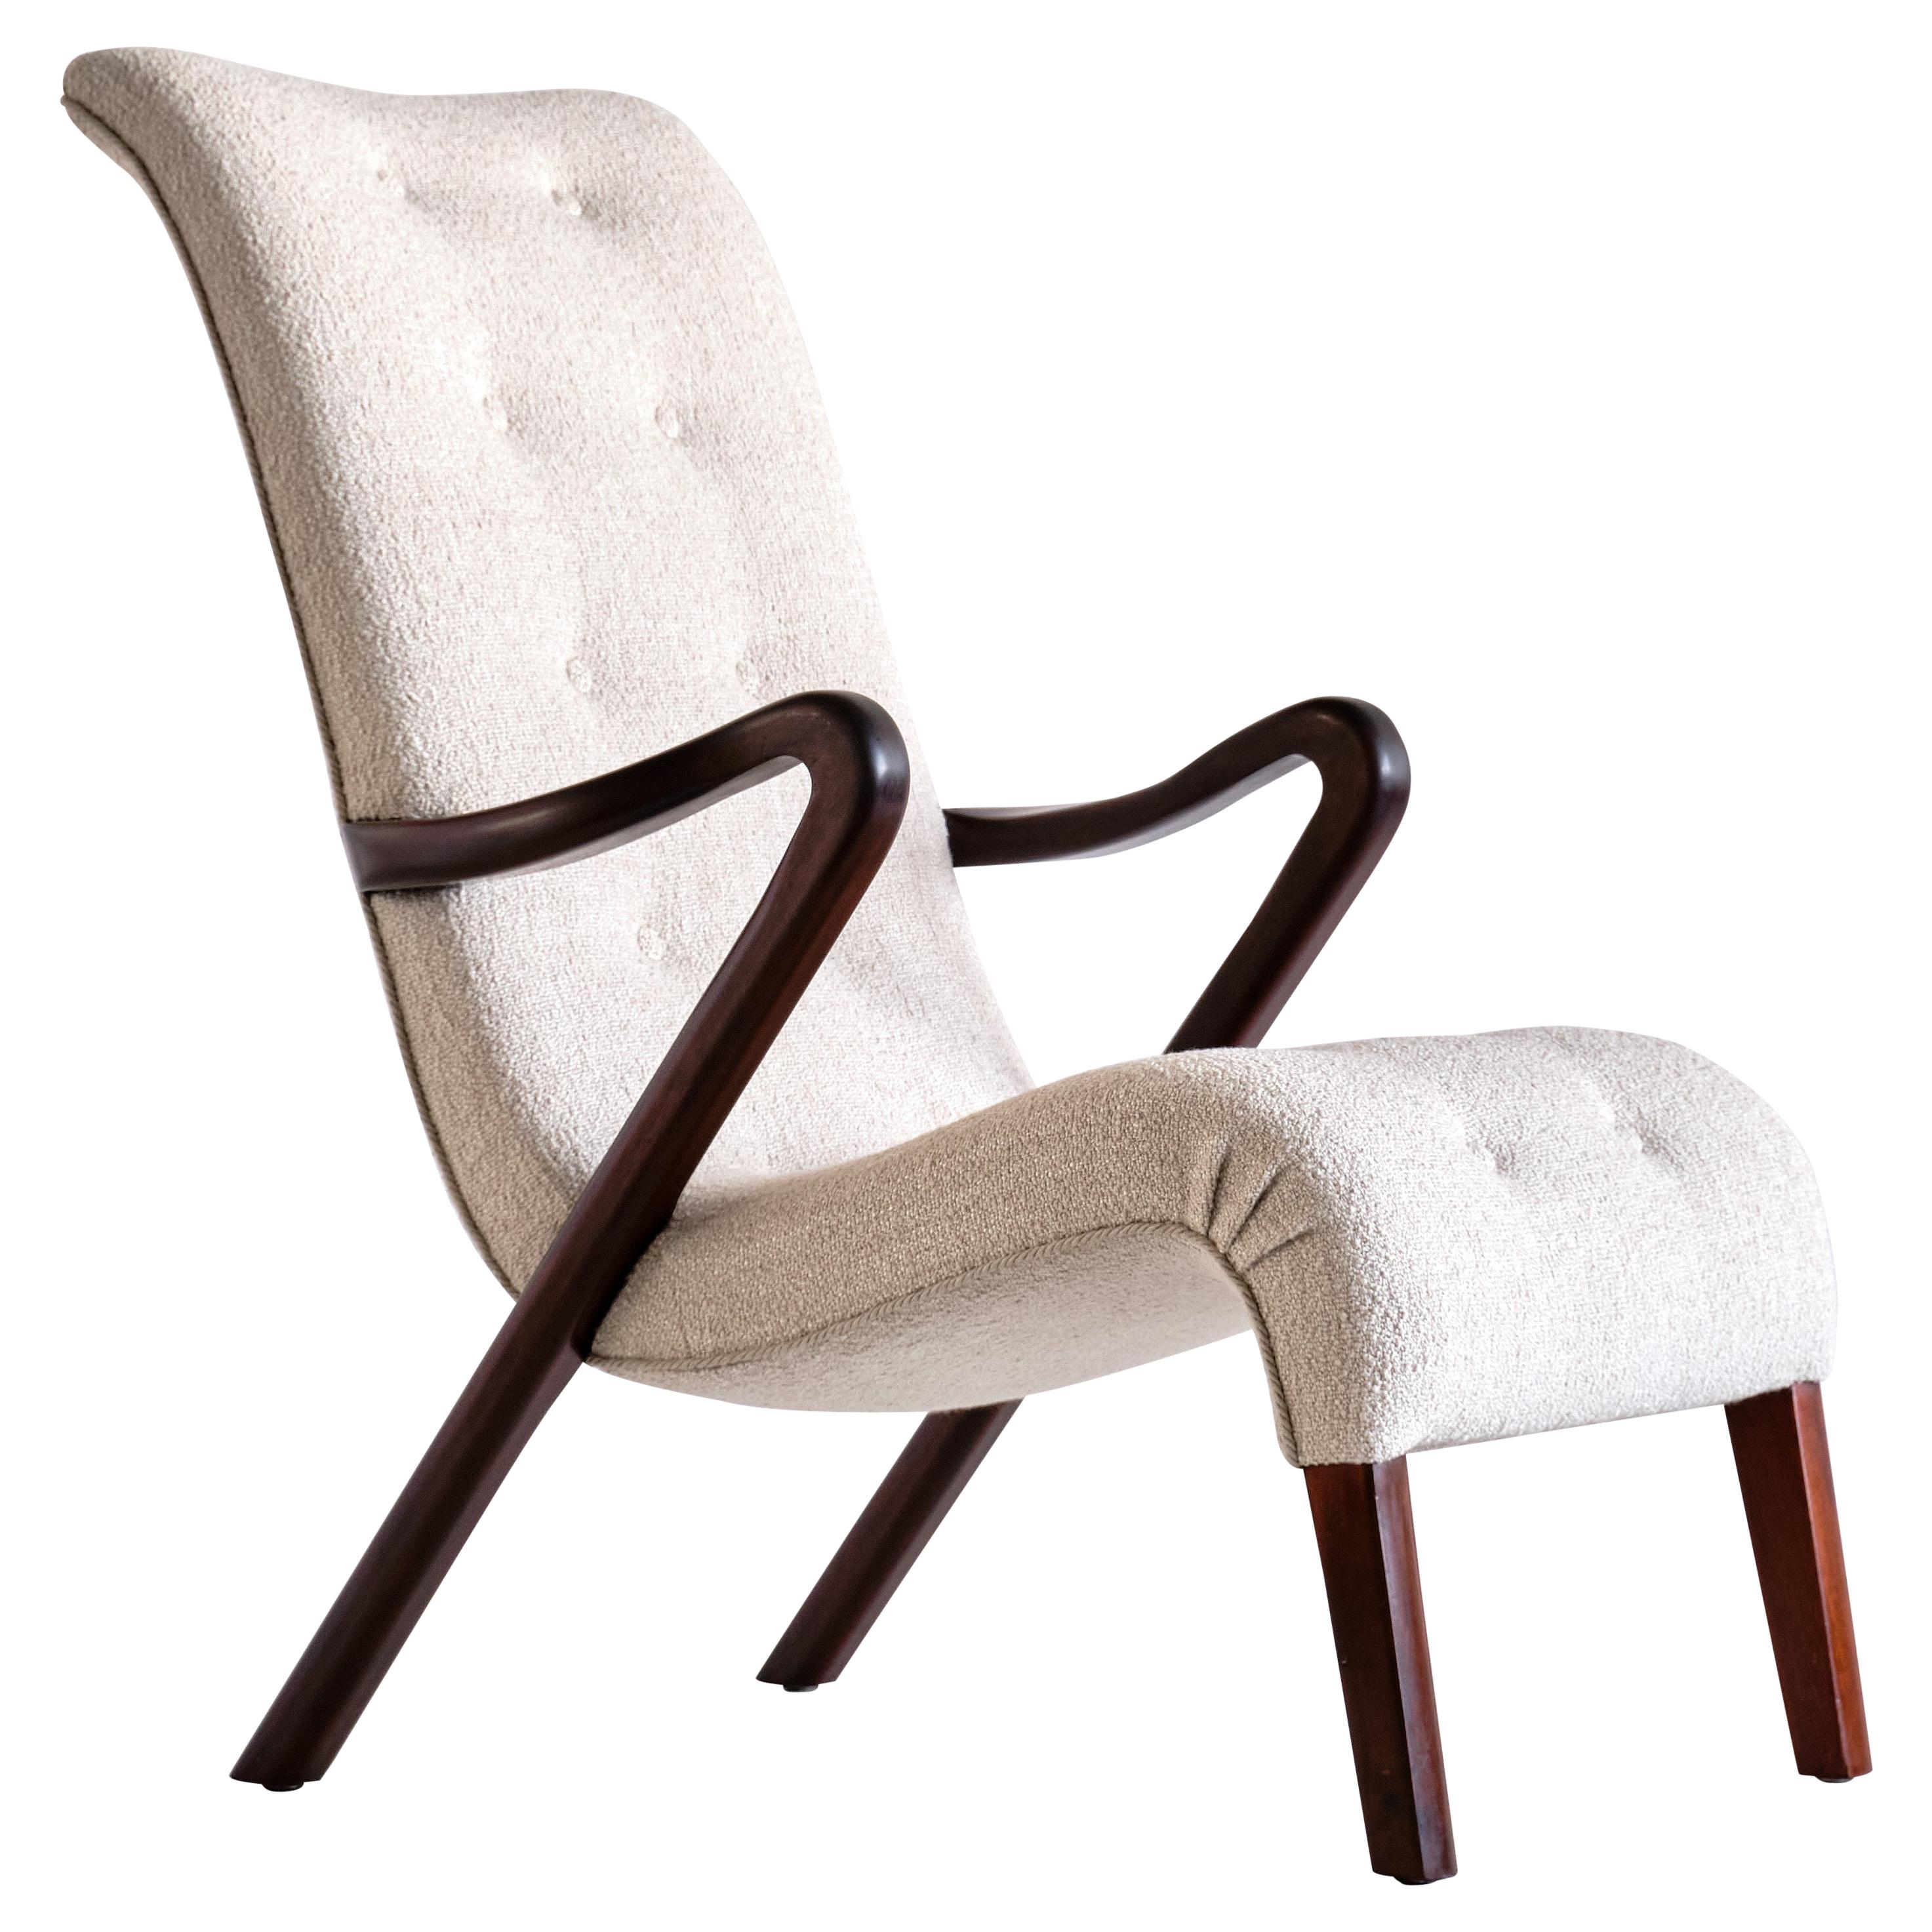 Axel Larsson Armchair in Bouclé and Mahogany, Sweden, 1940s